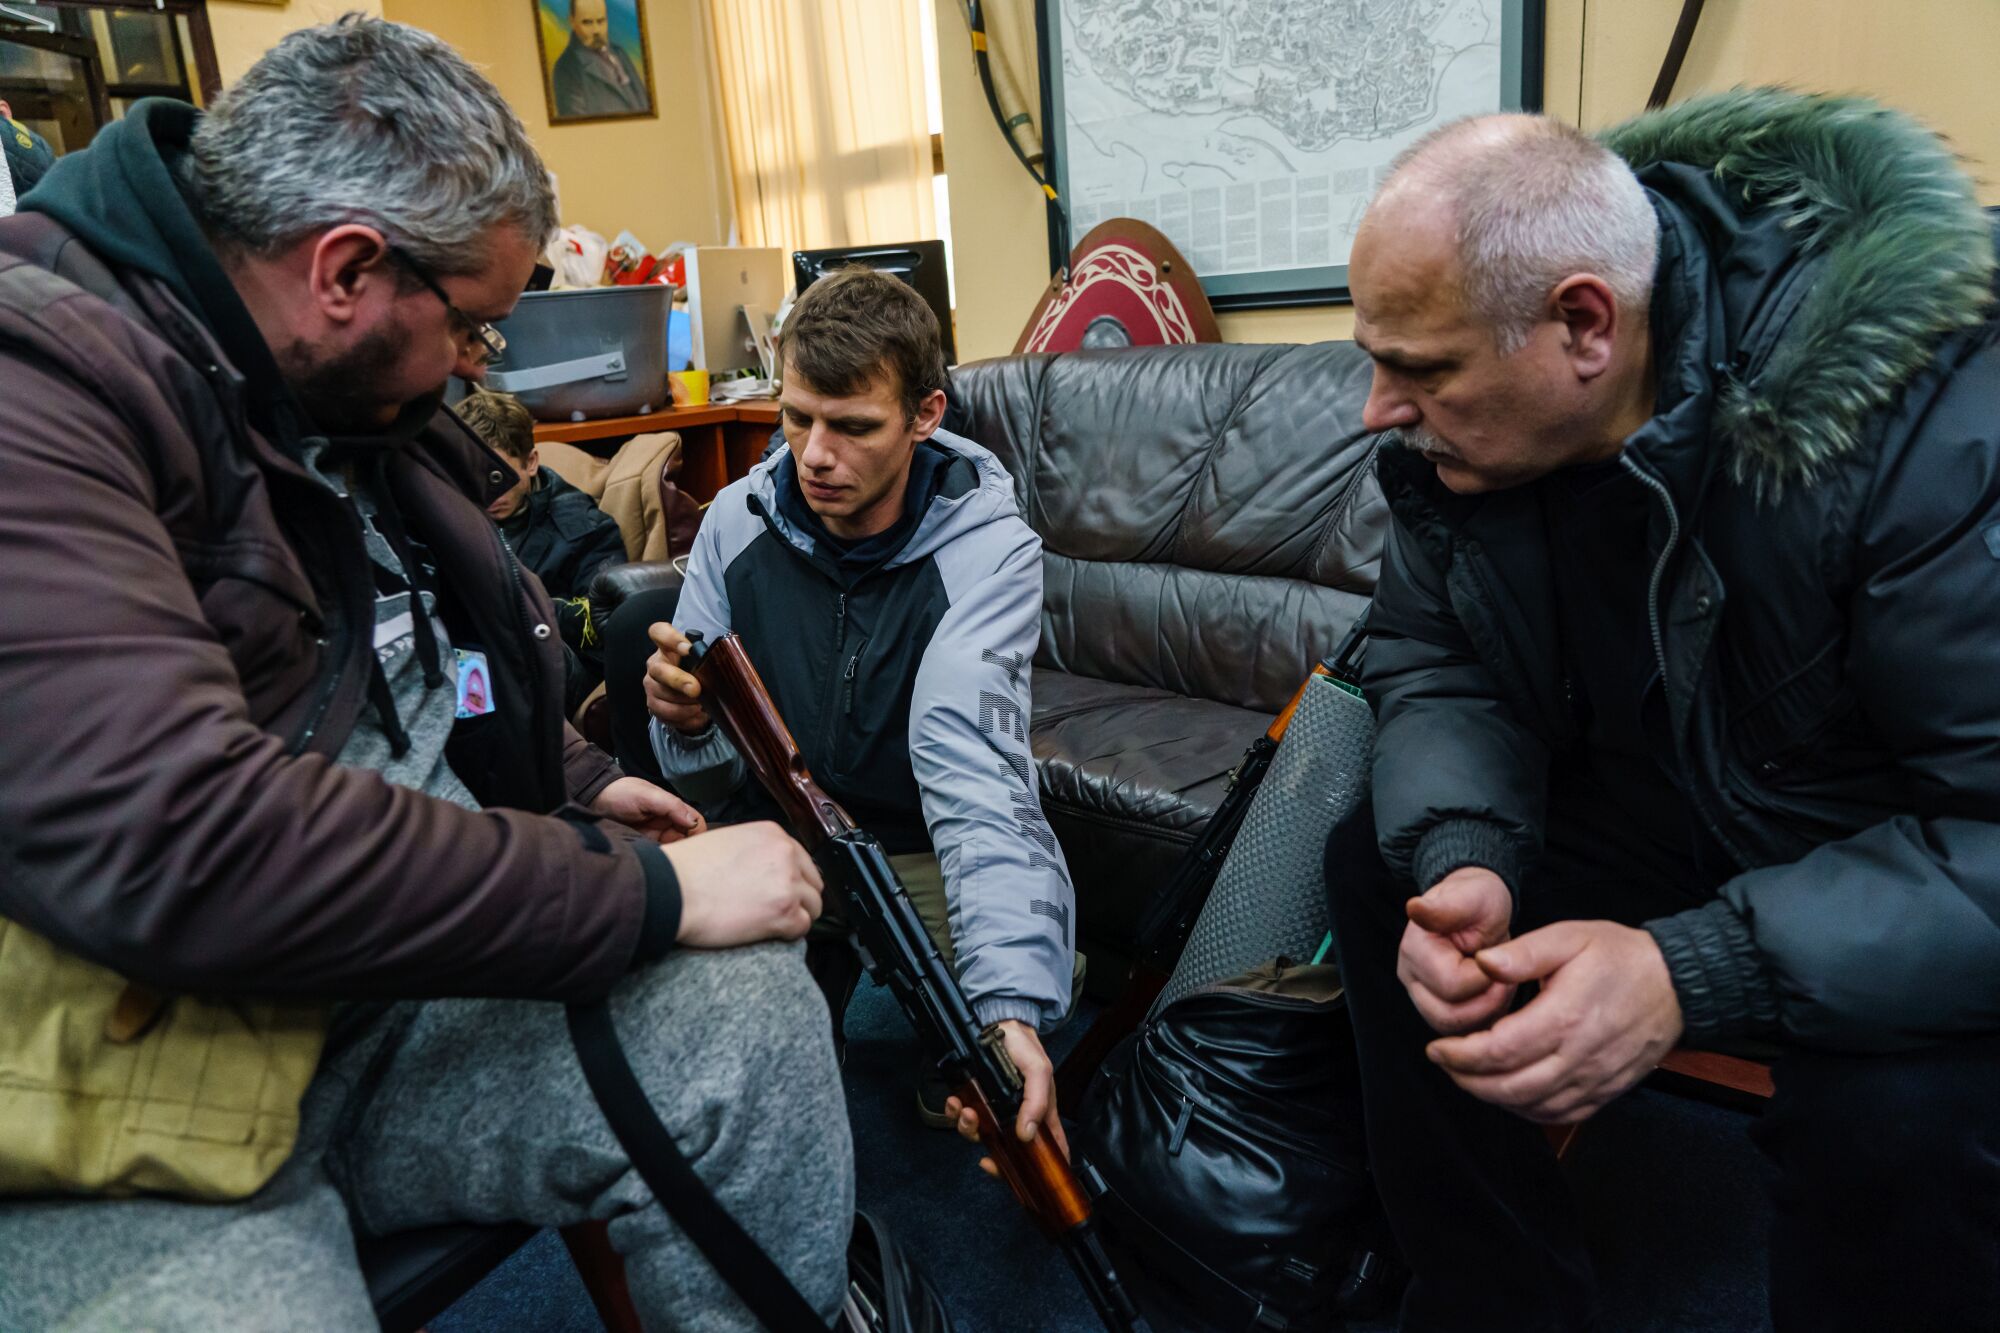  Volunteers  collect weapons in Kyiv.